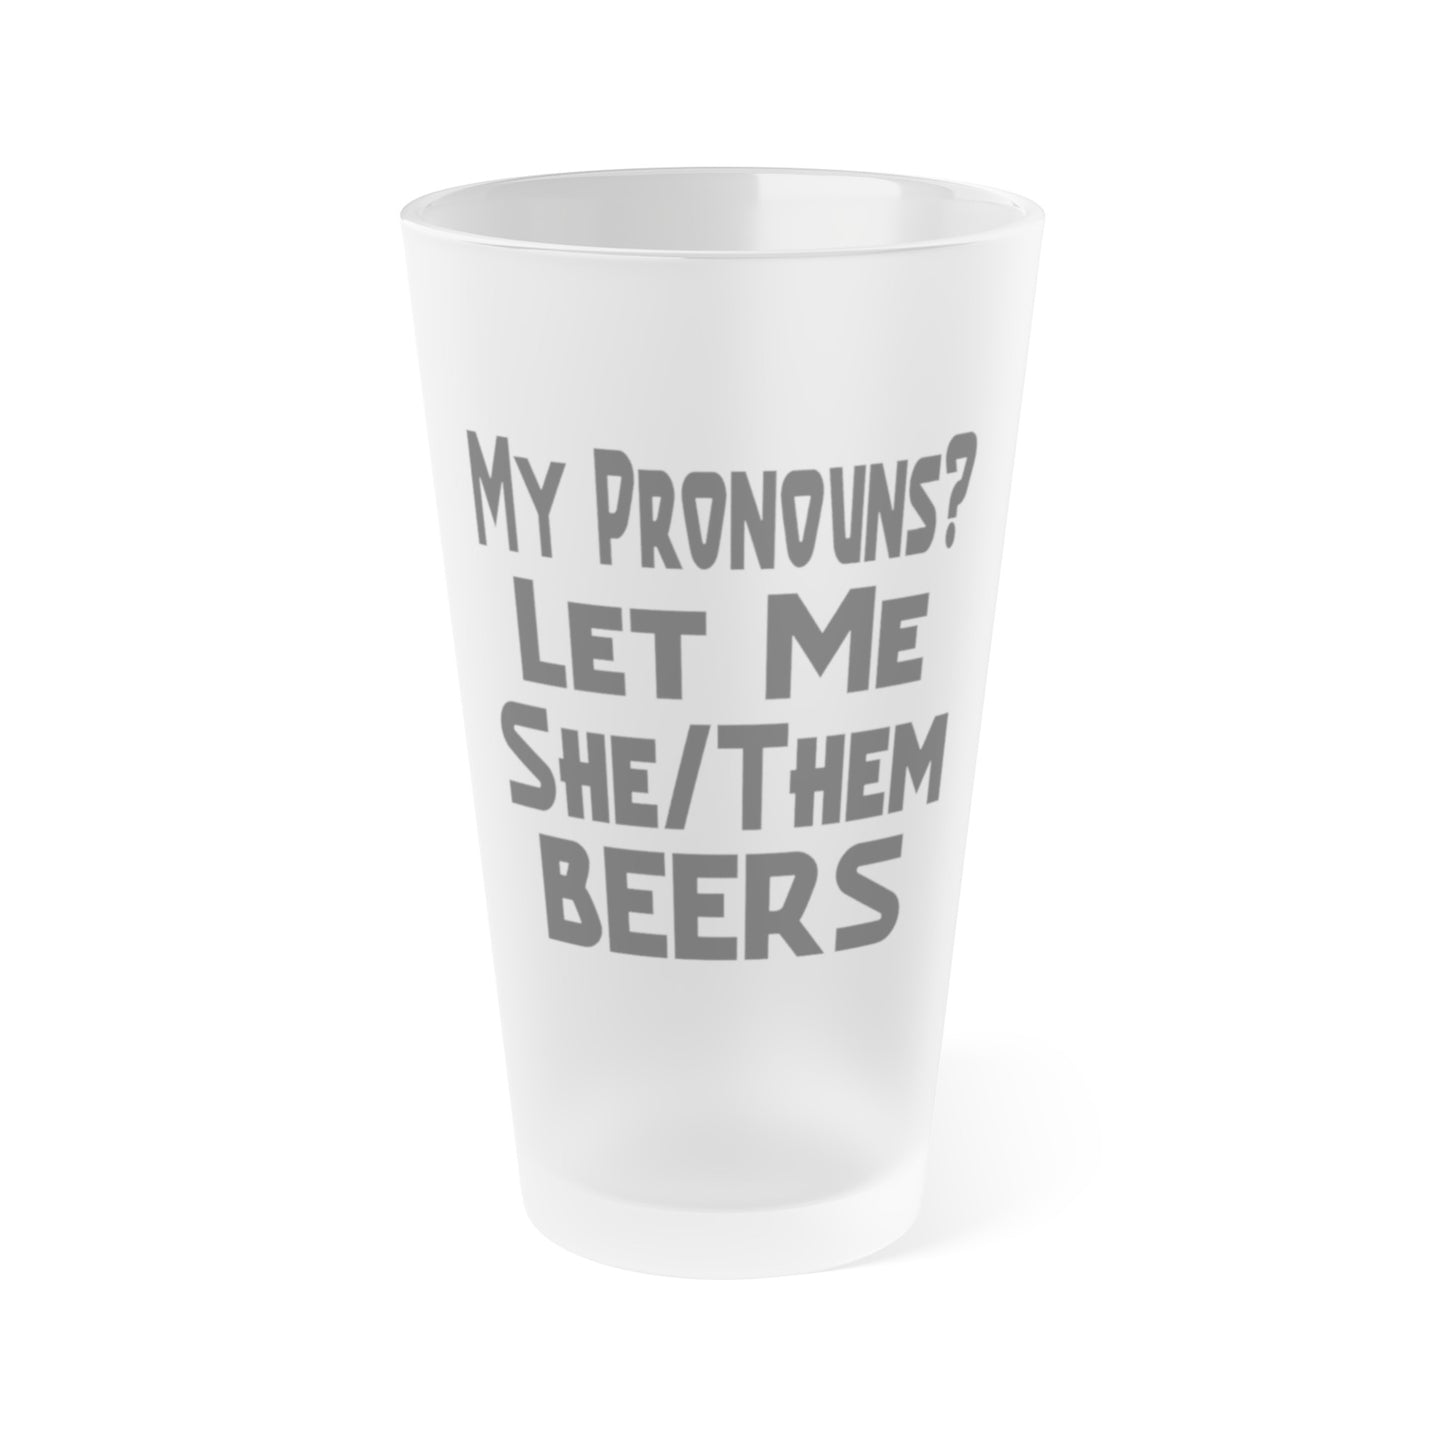 My Pronouns? Let Me She/Them Beers - Frosted Pint Glass, 16oz